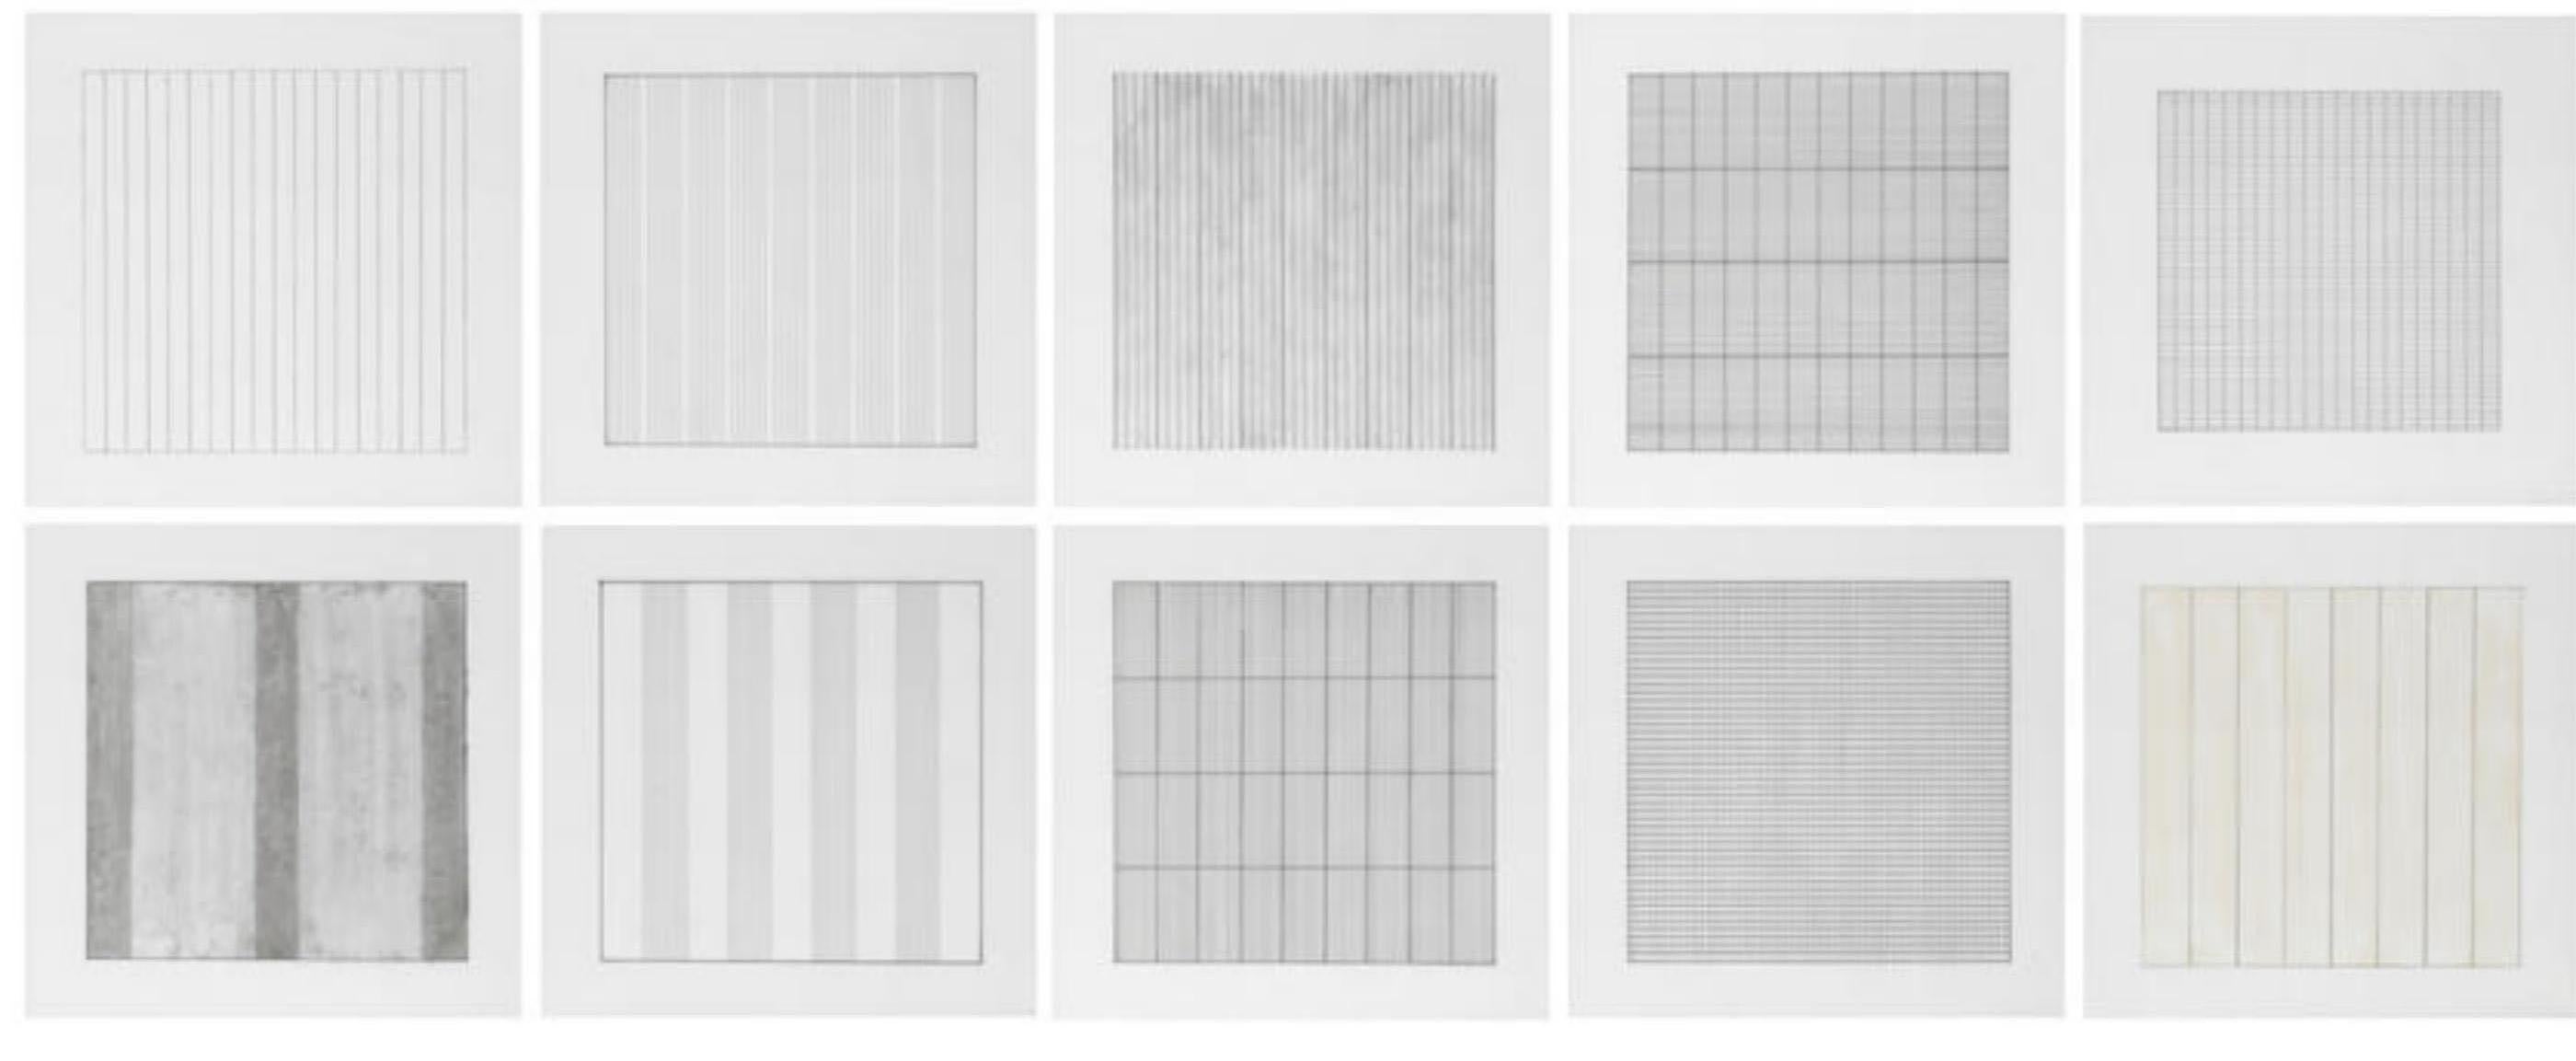 Paintings and Drawings: Suite of 10 Separate (Individual) lithographs on vellum  - Minimalist Print by Agnes Martin